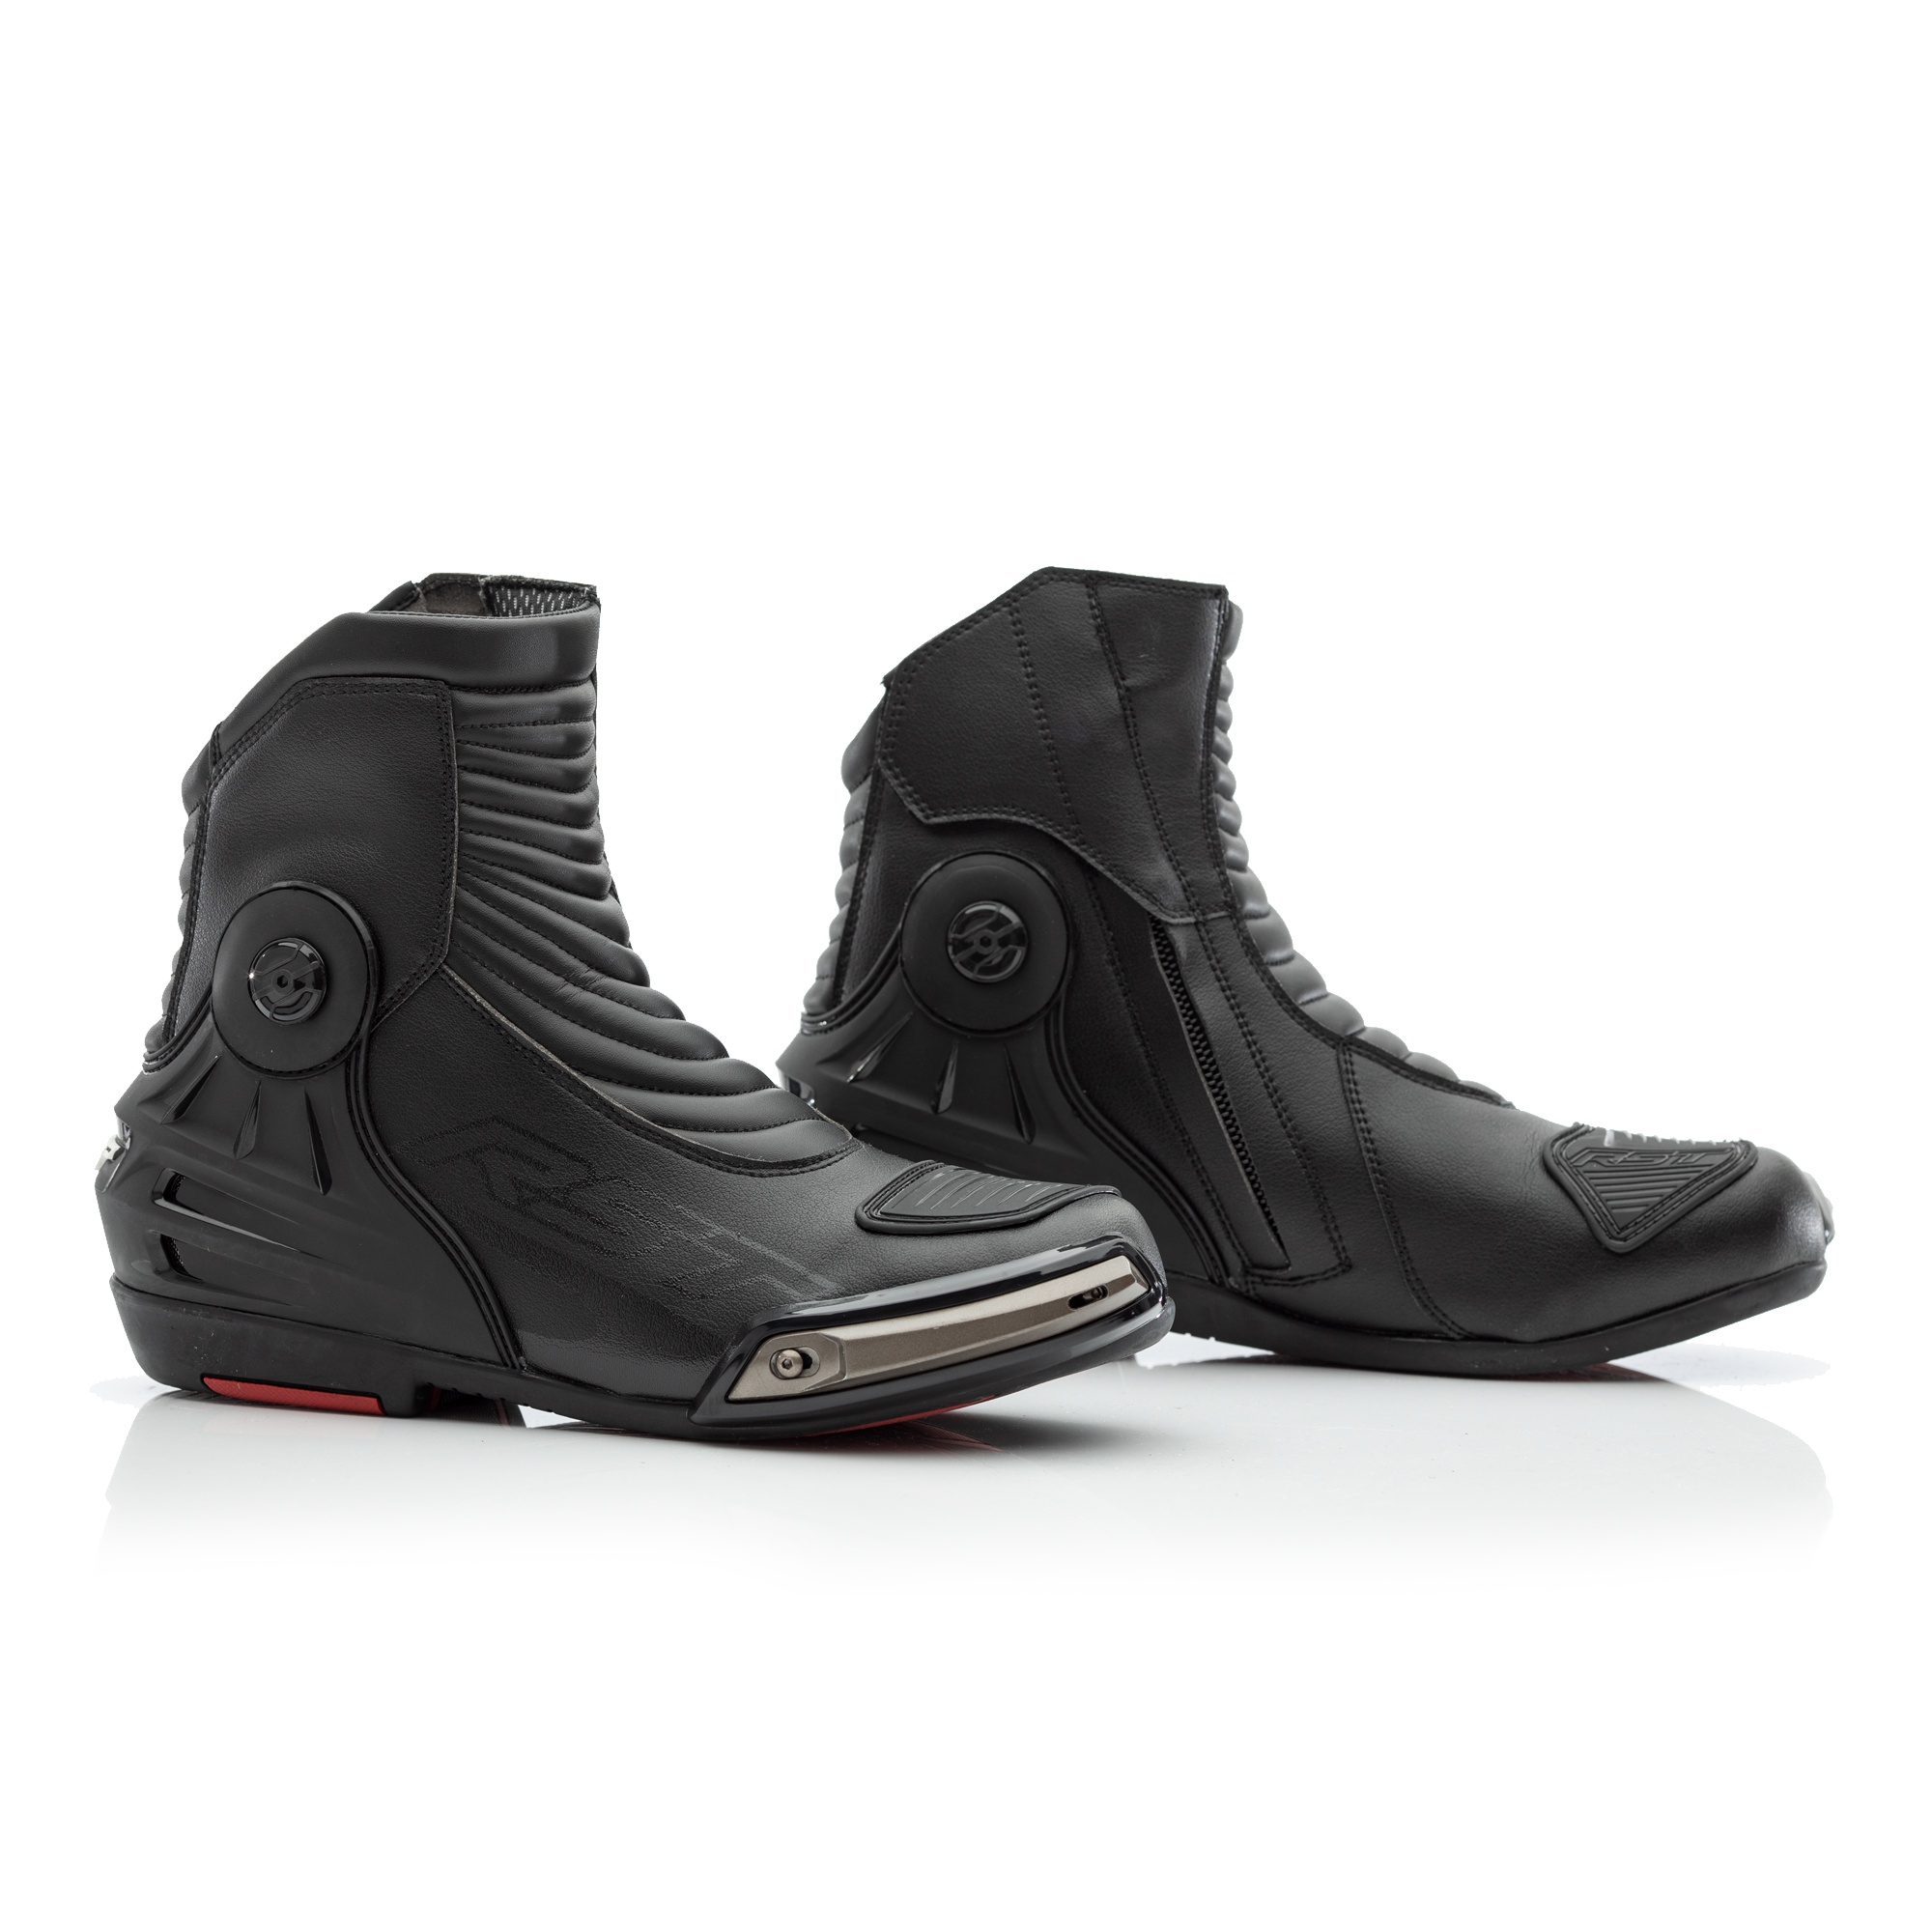 rst boots uk